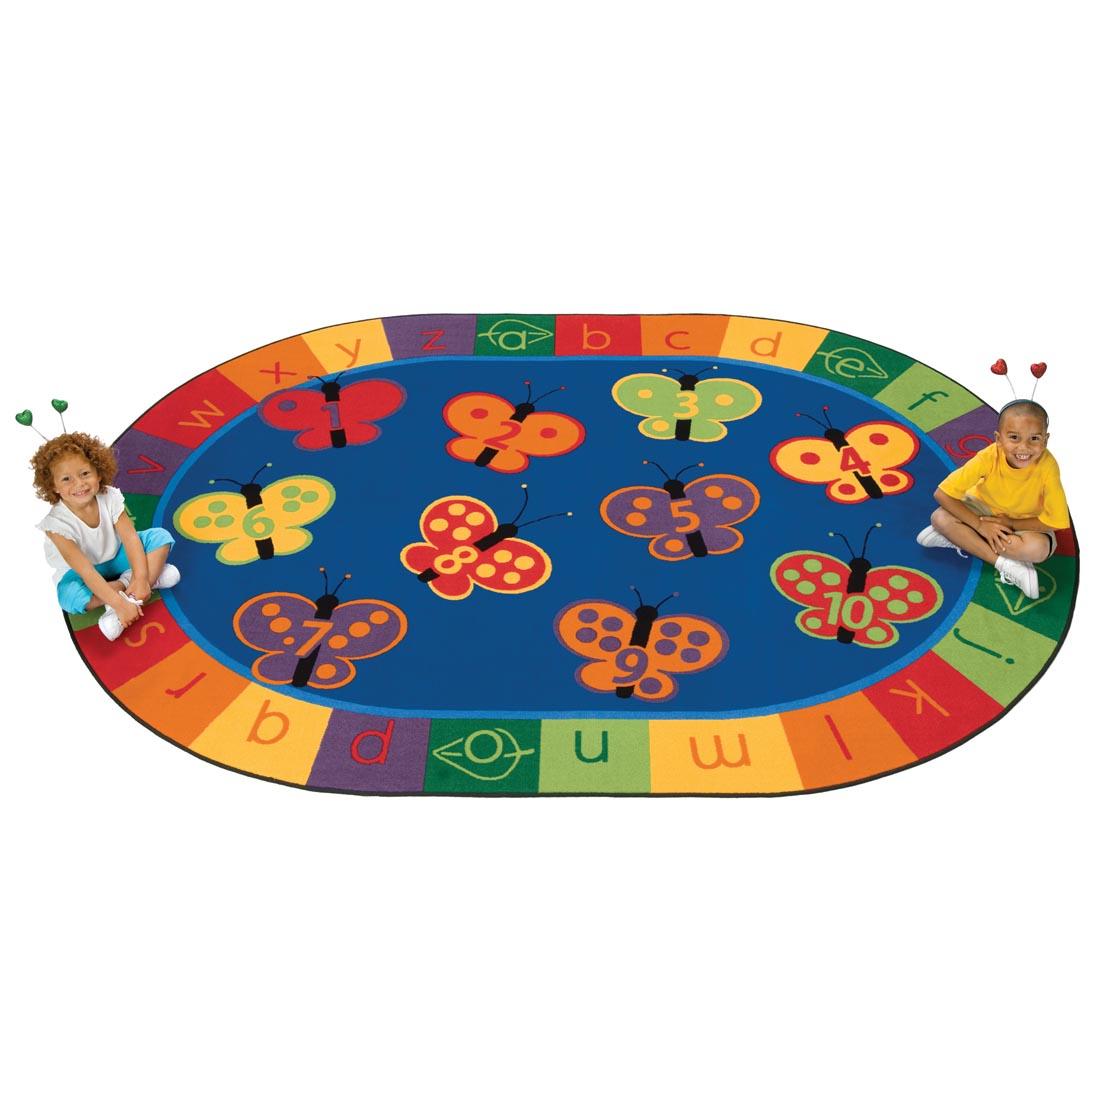 Children sitting on the 123 ABC Butterfly Fun Oval Rug by Carpets For Kids